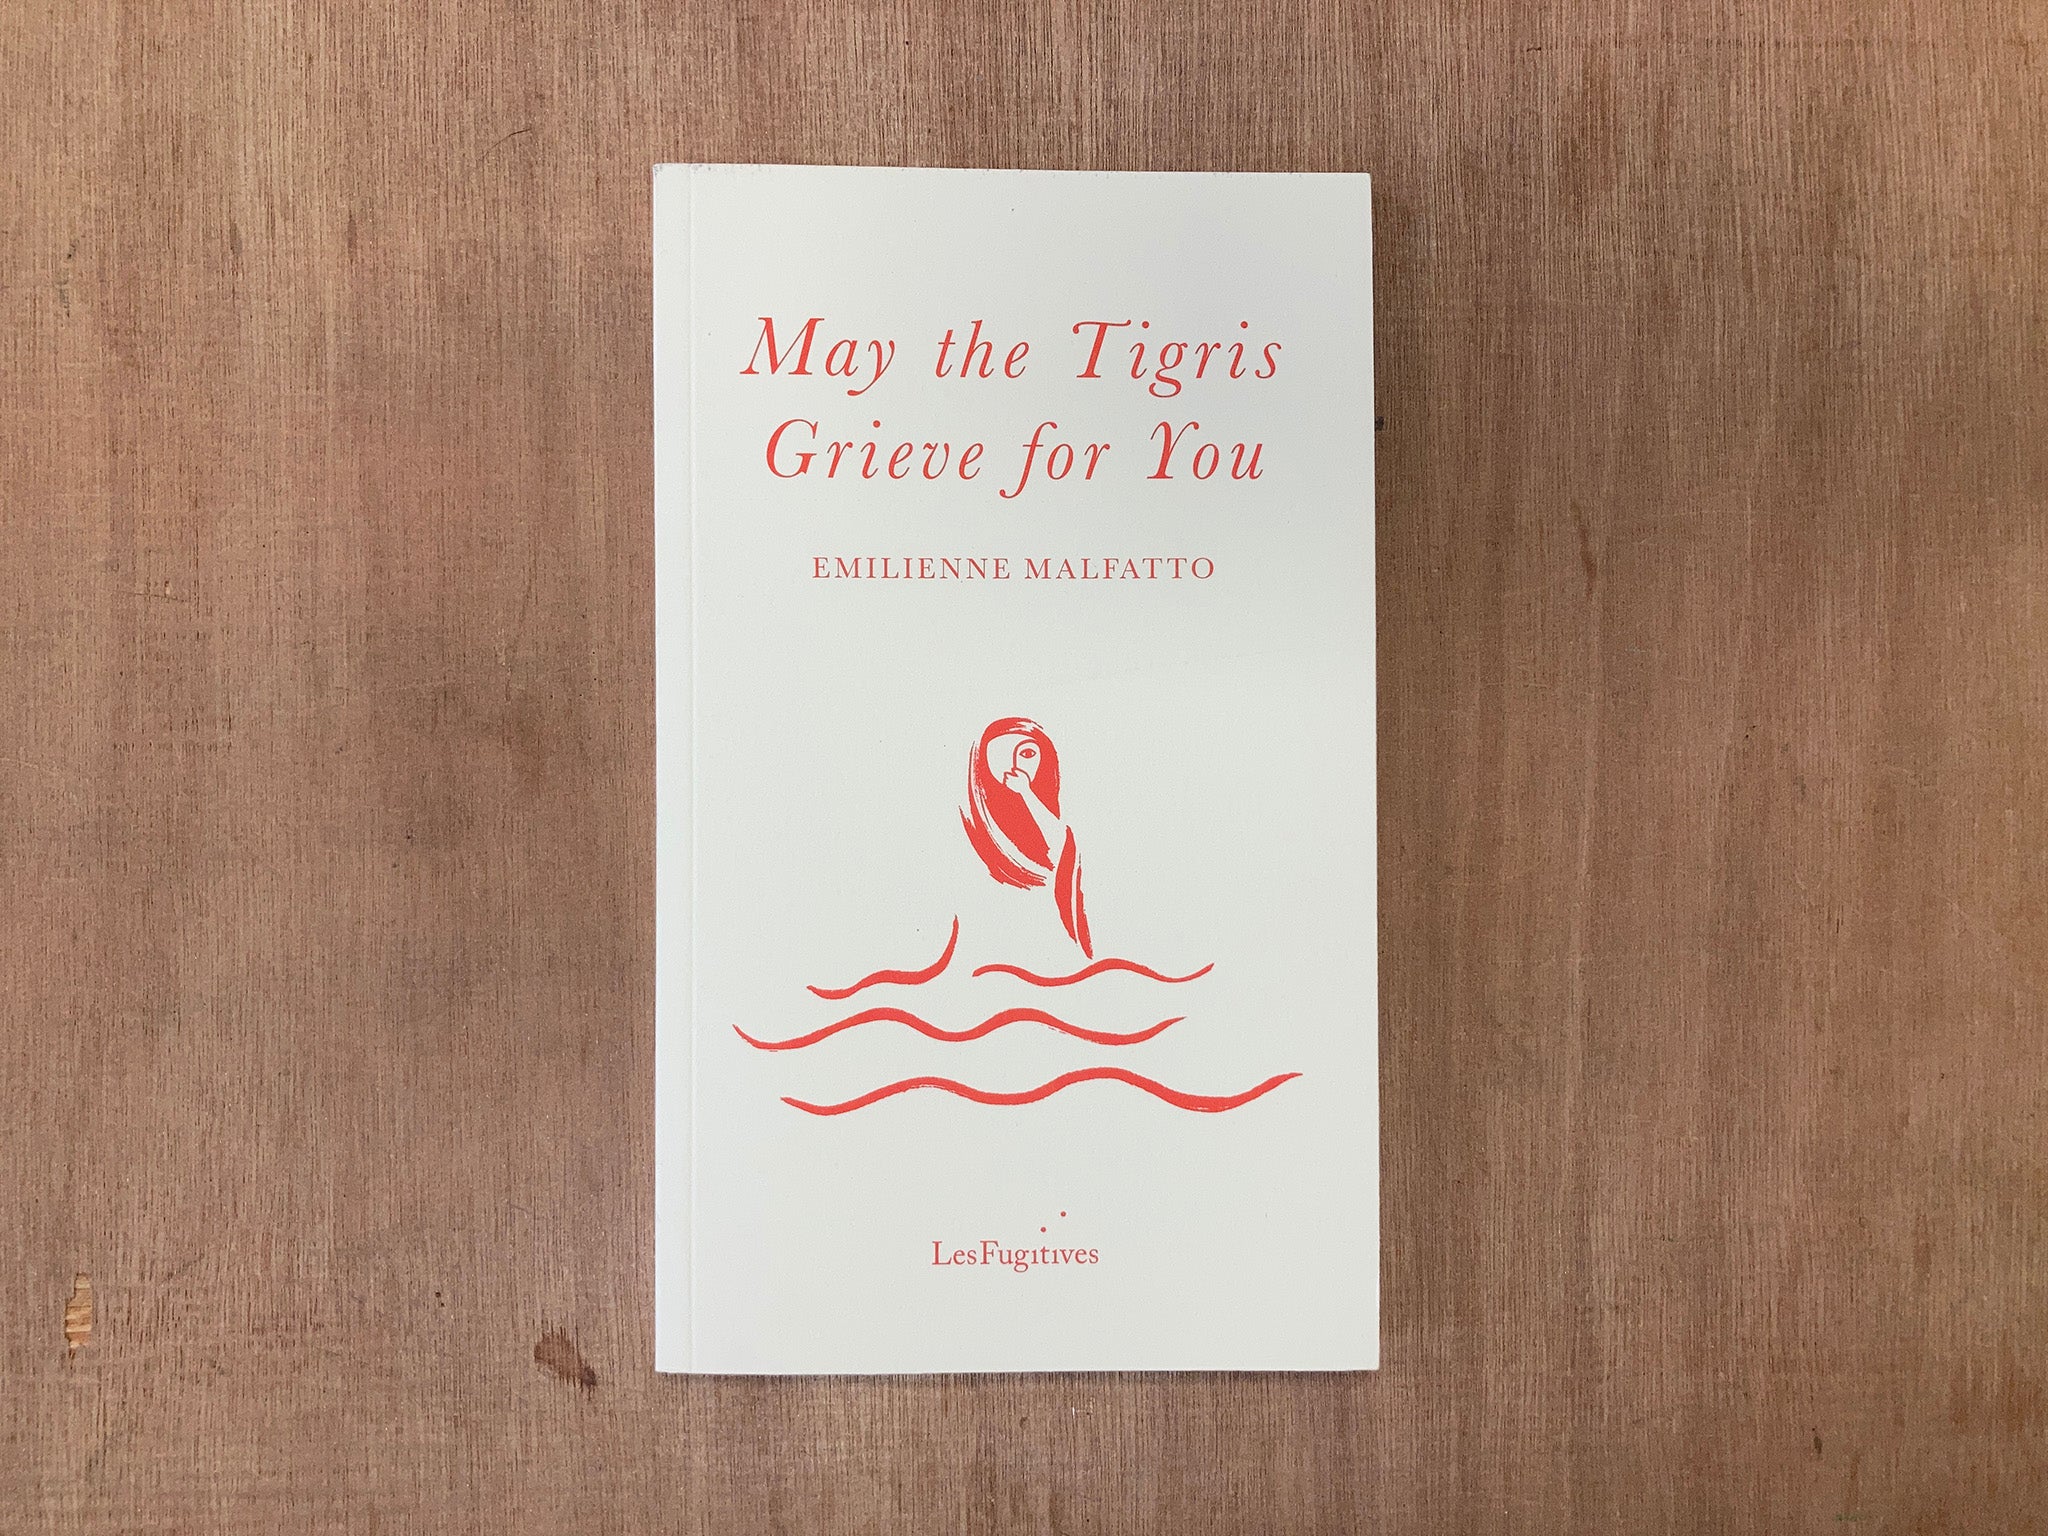 MAY THE TIGRIS GRIEVE FOR YOU by Emilienne Malfatto